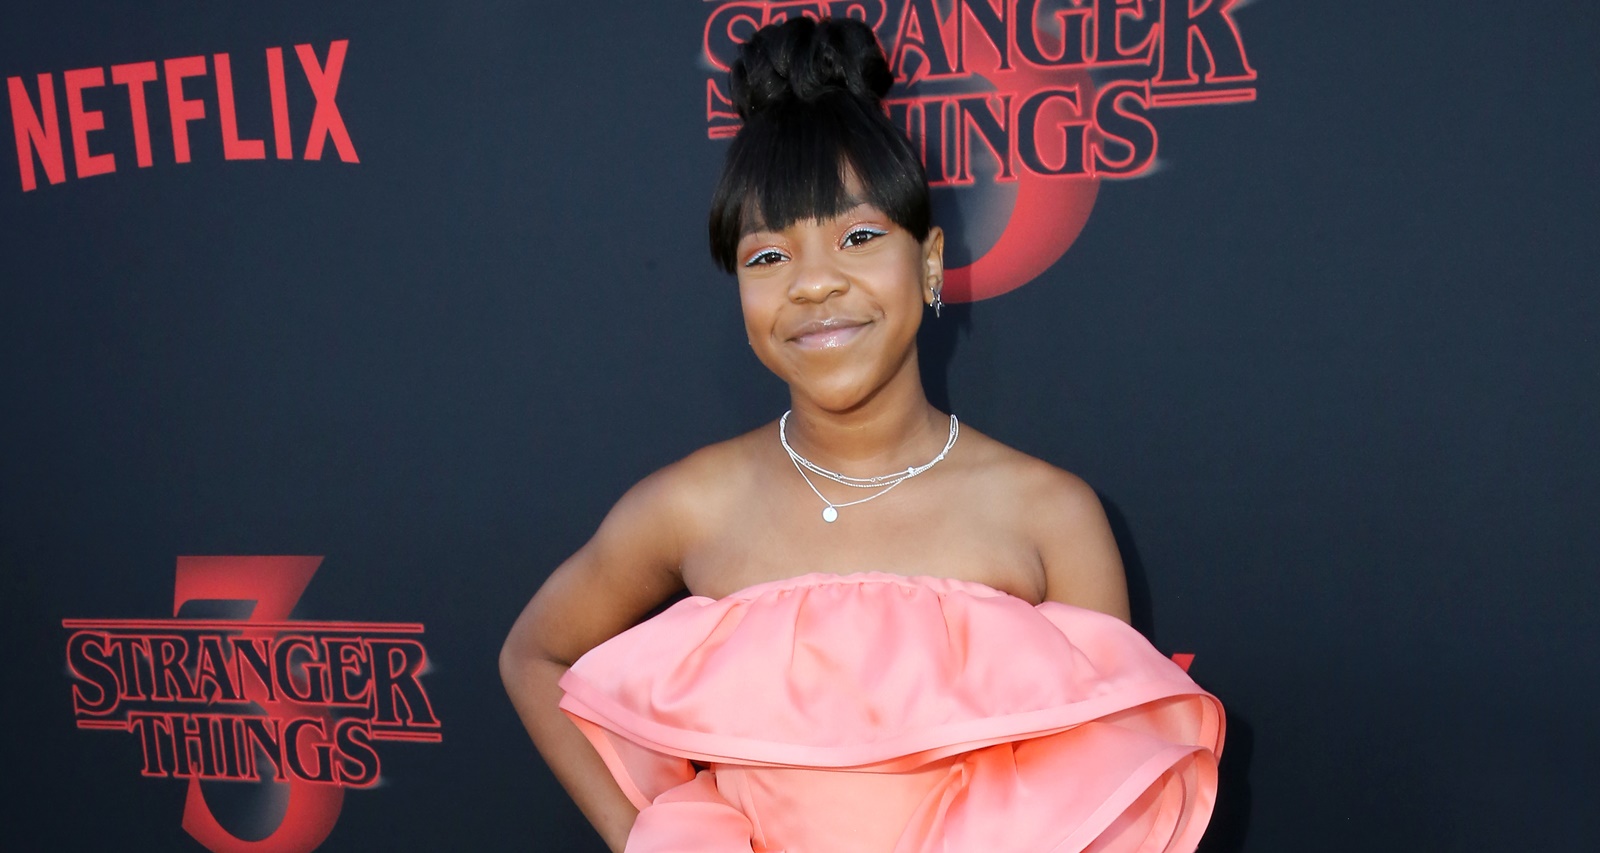 Priah Ferguson Wiki, Age, Family, Facts About Erica Sinclair From “Stranger Things”